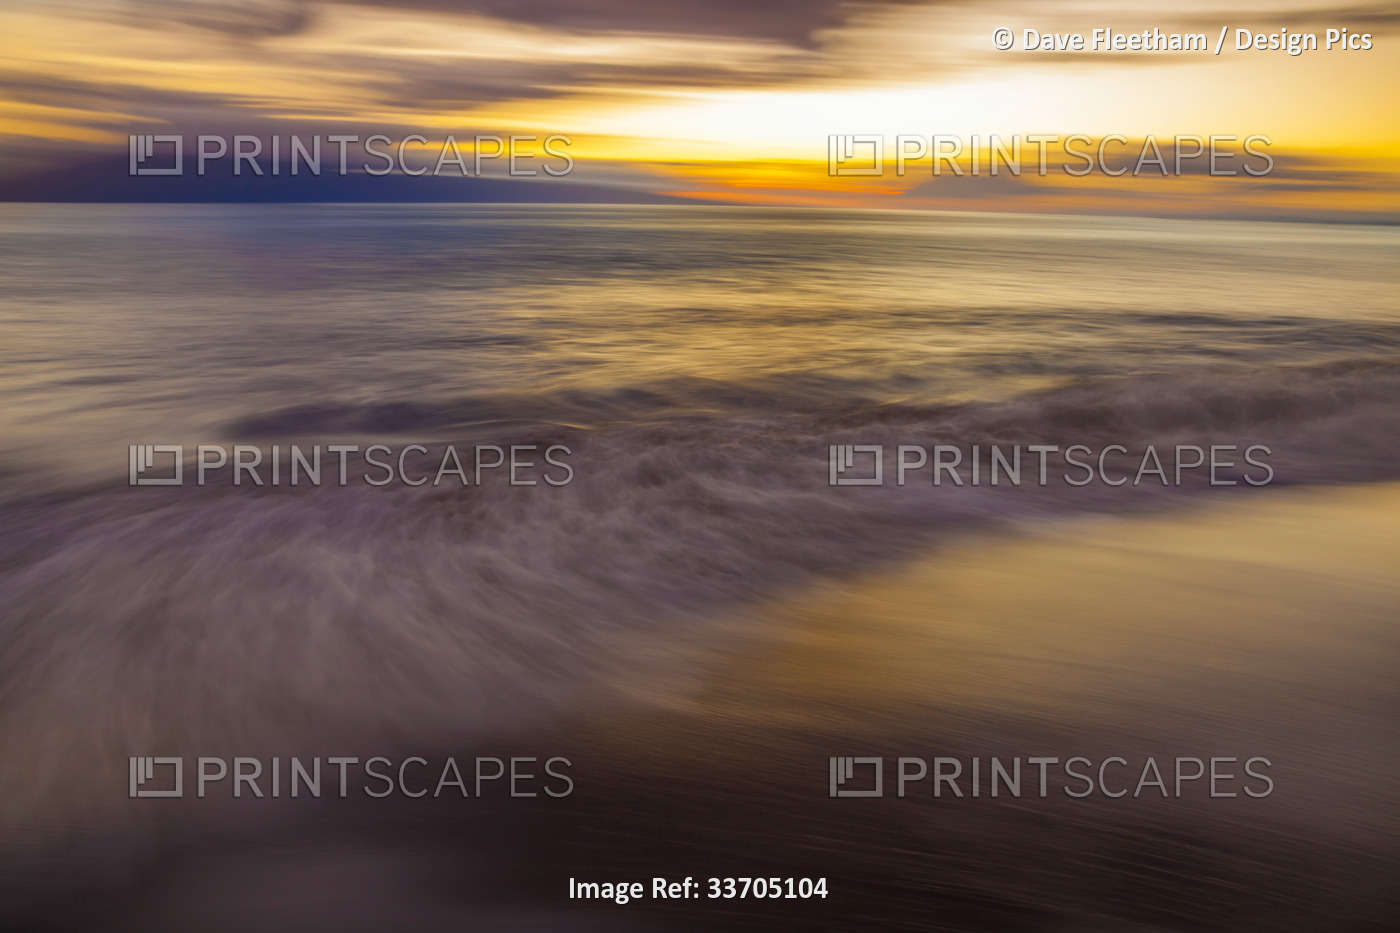 An intentionally/artistically blurred sunset from the island of Maui, Hawaii, ...